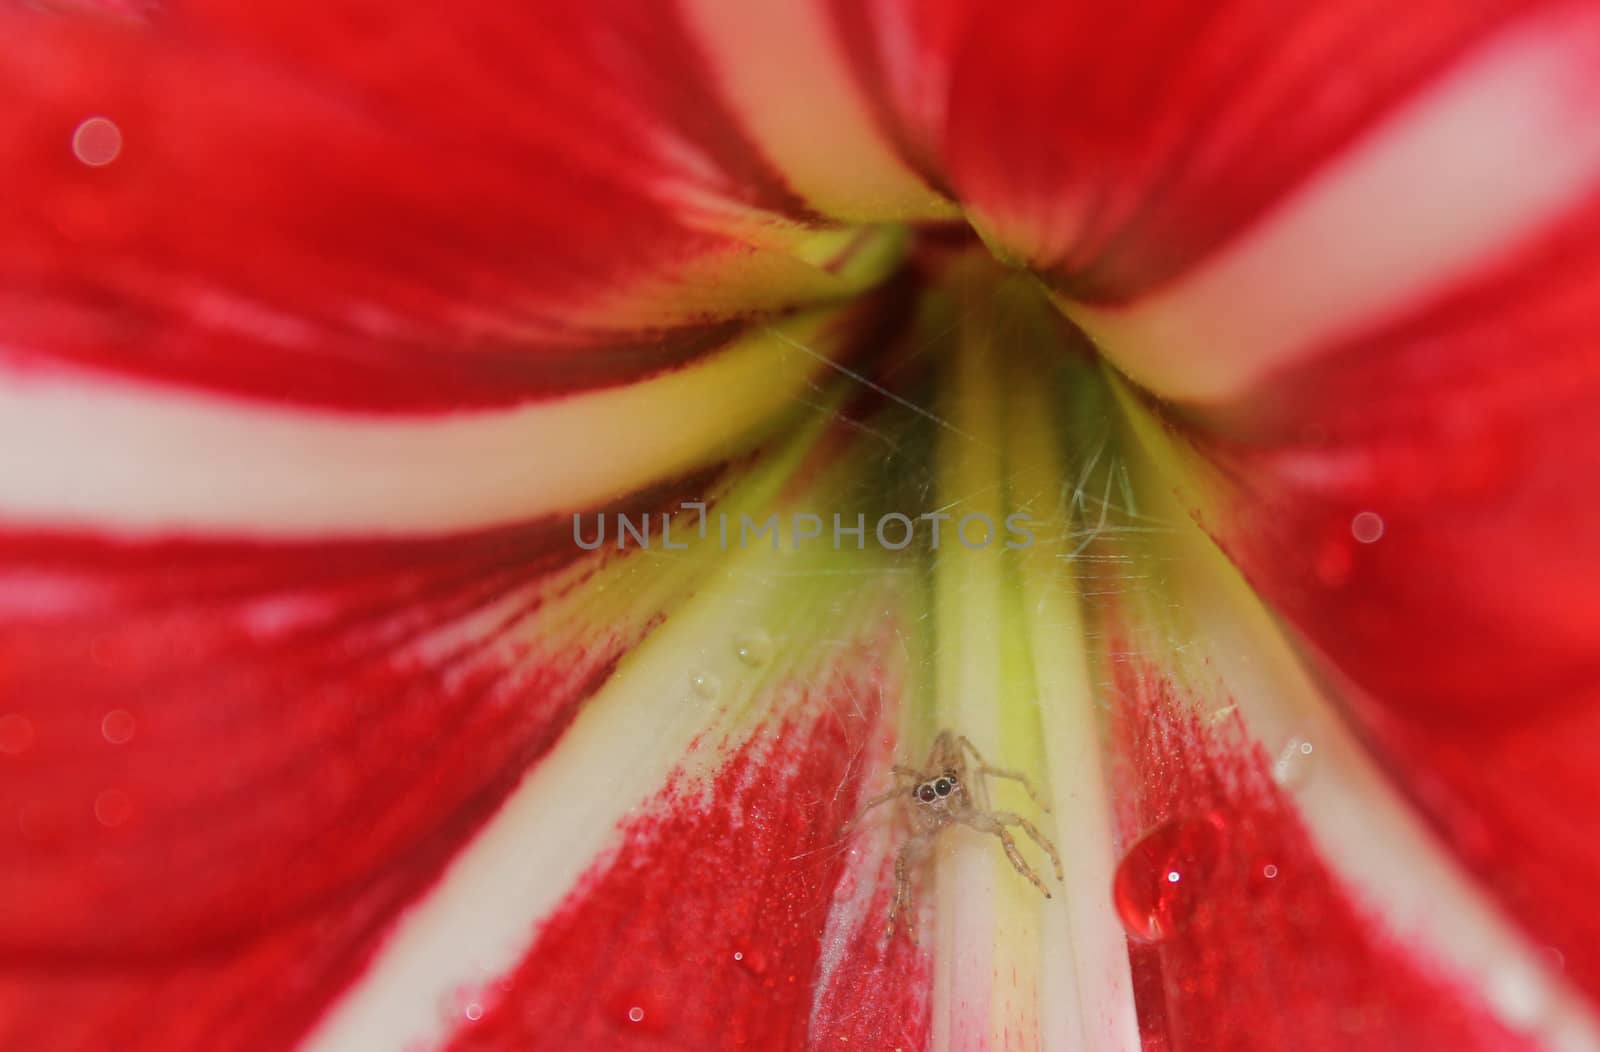 Small Spider in Red Amaryllis Flower by Marti157900